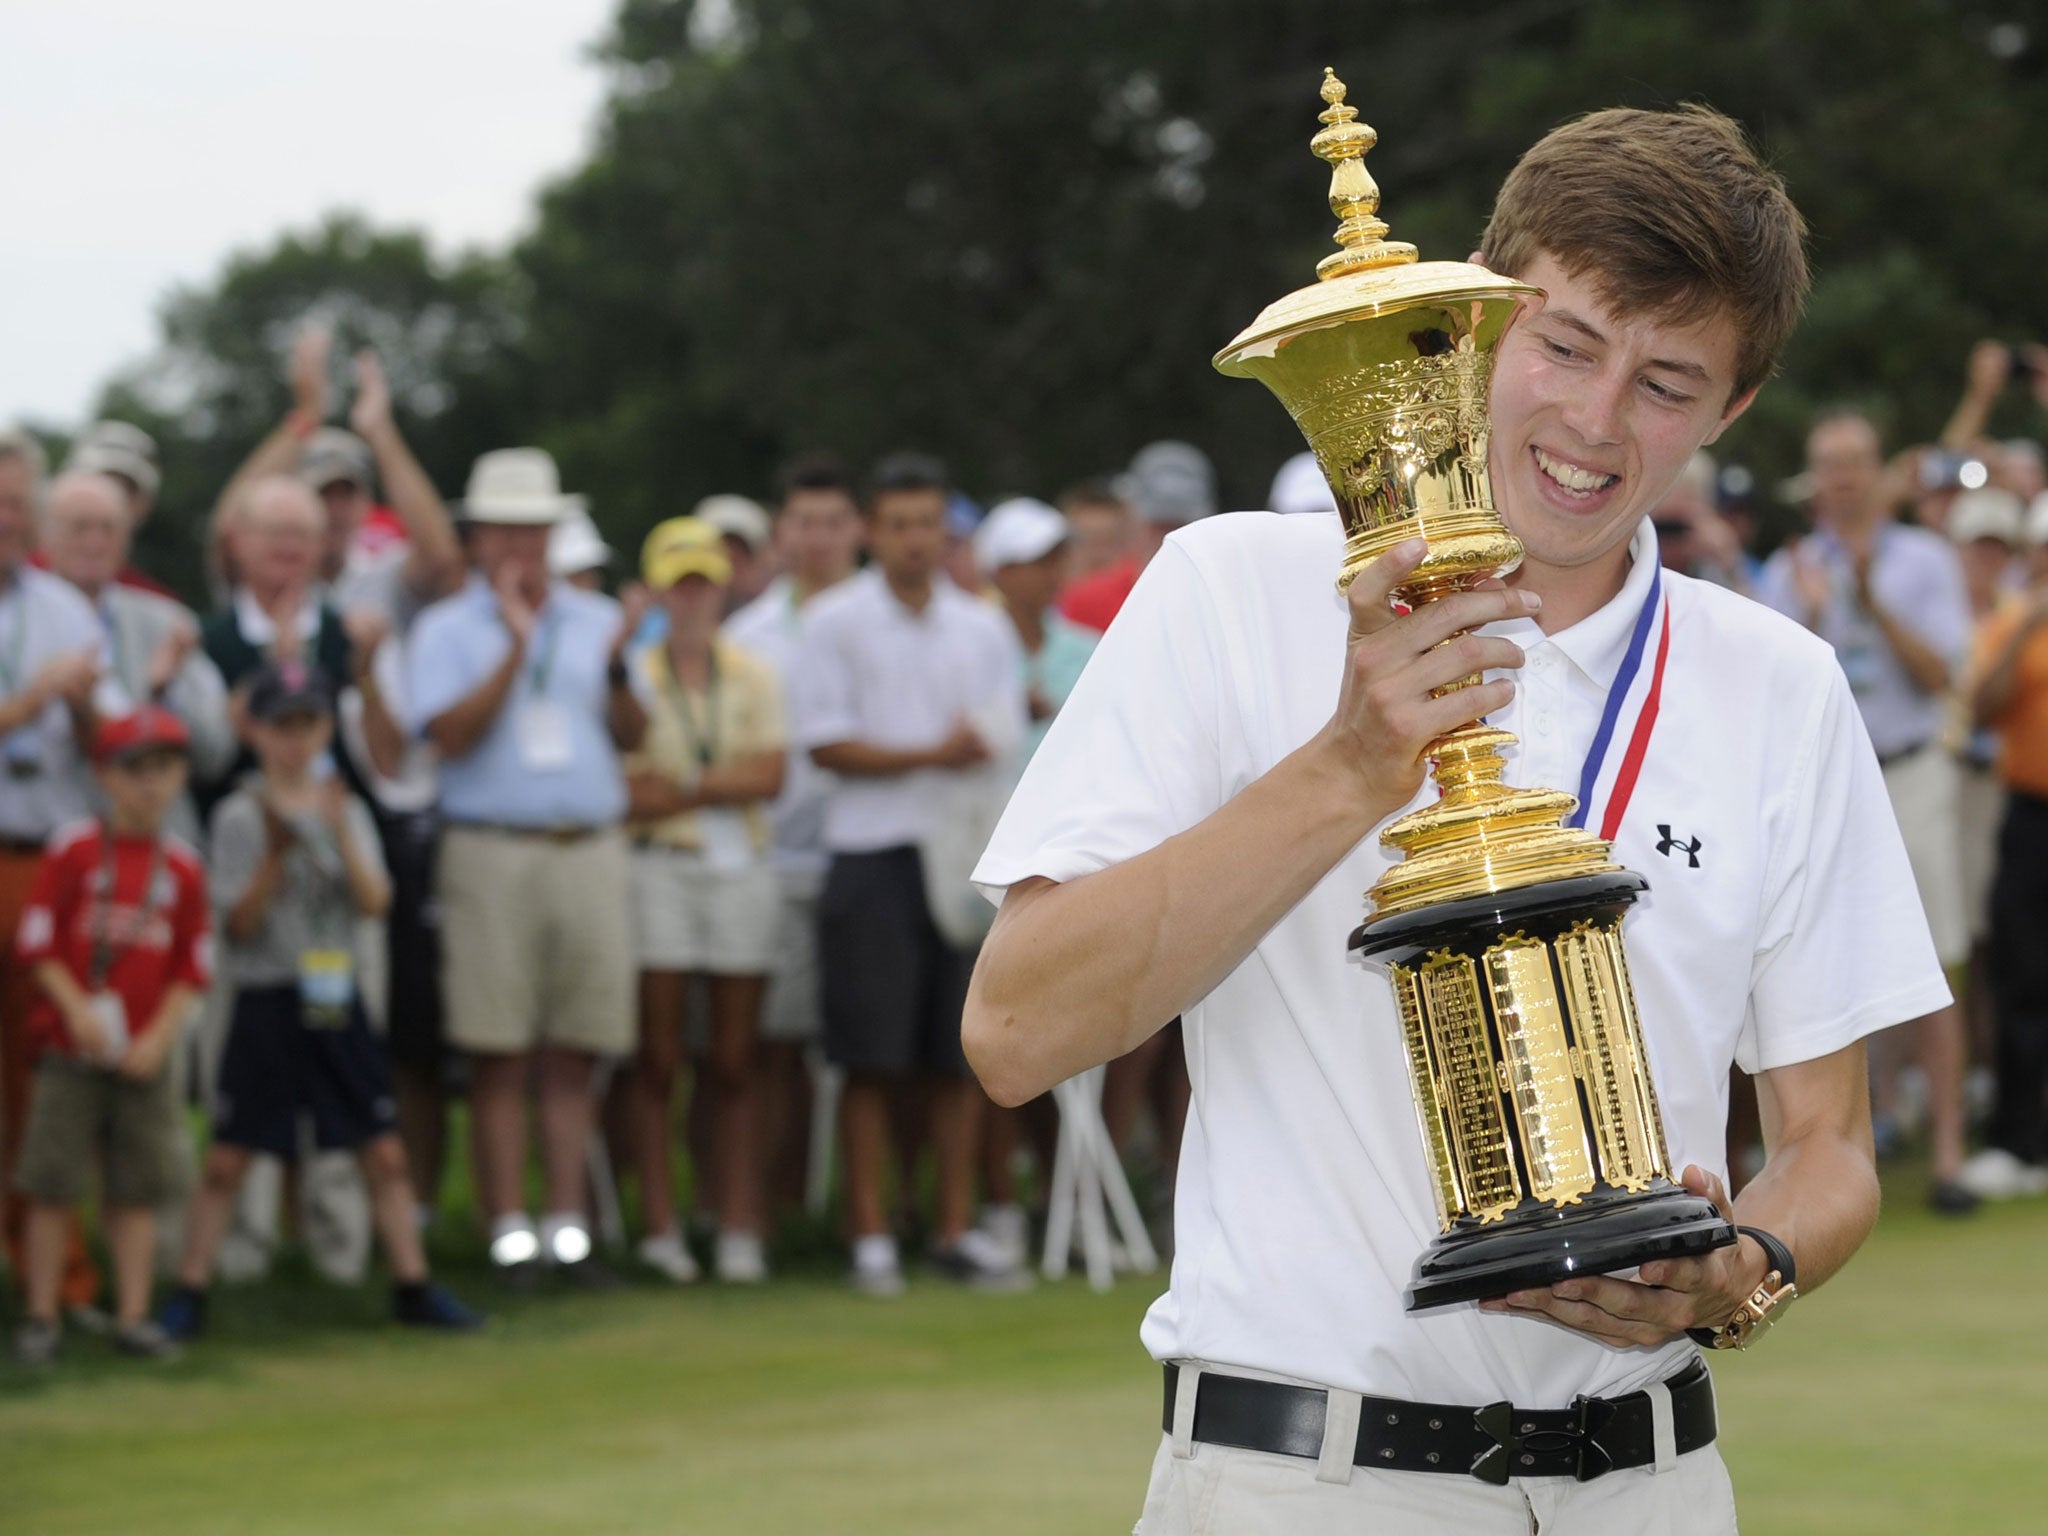 Matt Fitzpatrick: The 18-year-old's victory takes him to No 1 in the world's amateur rankings